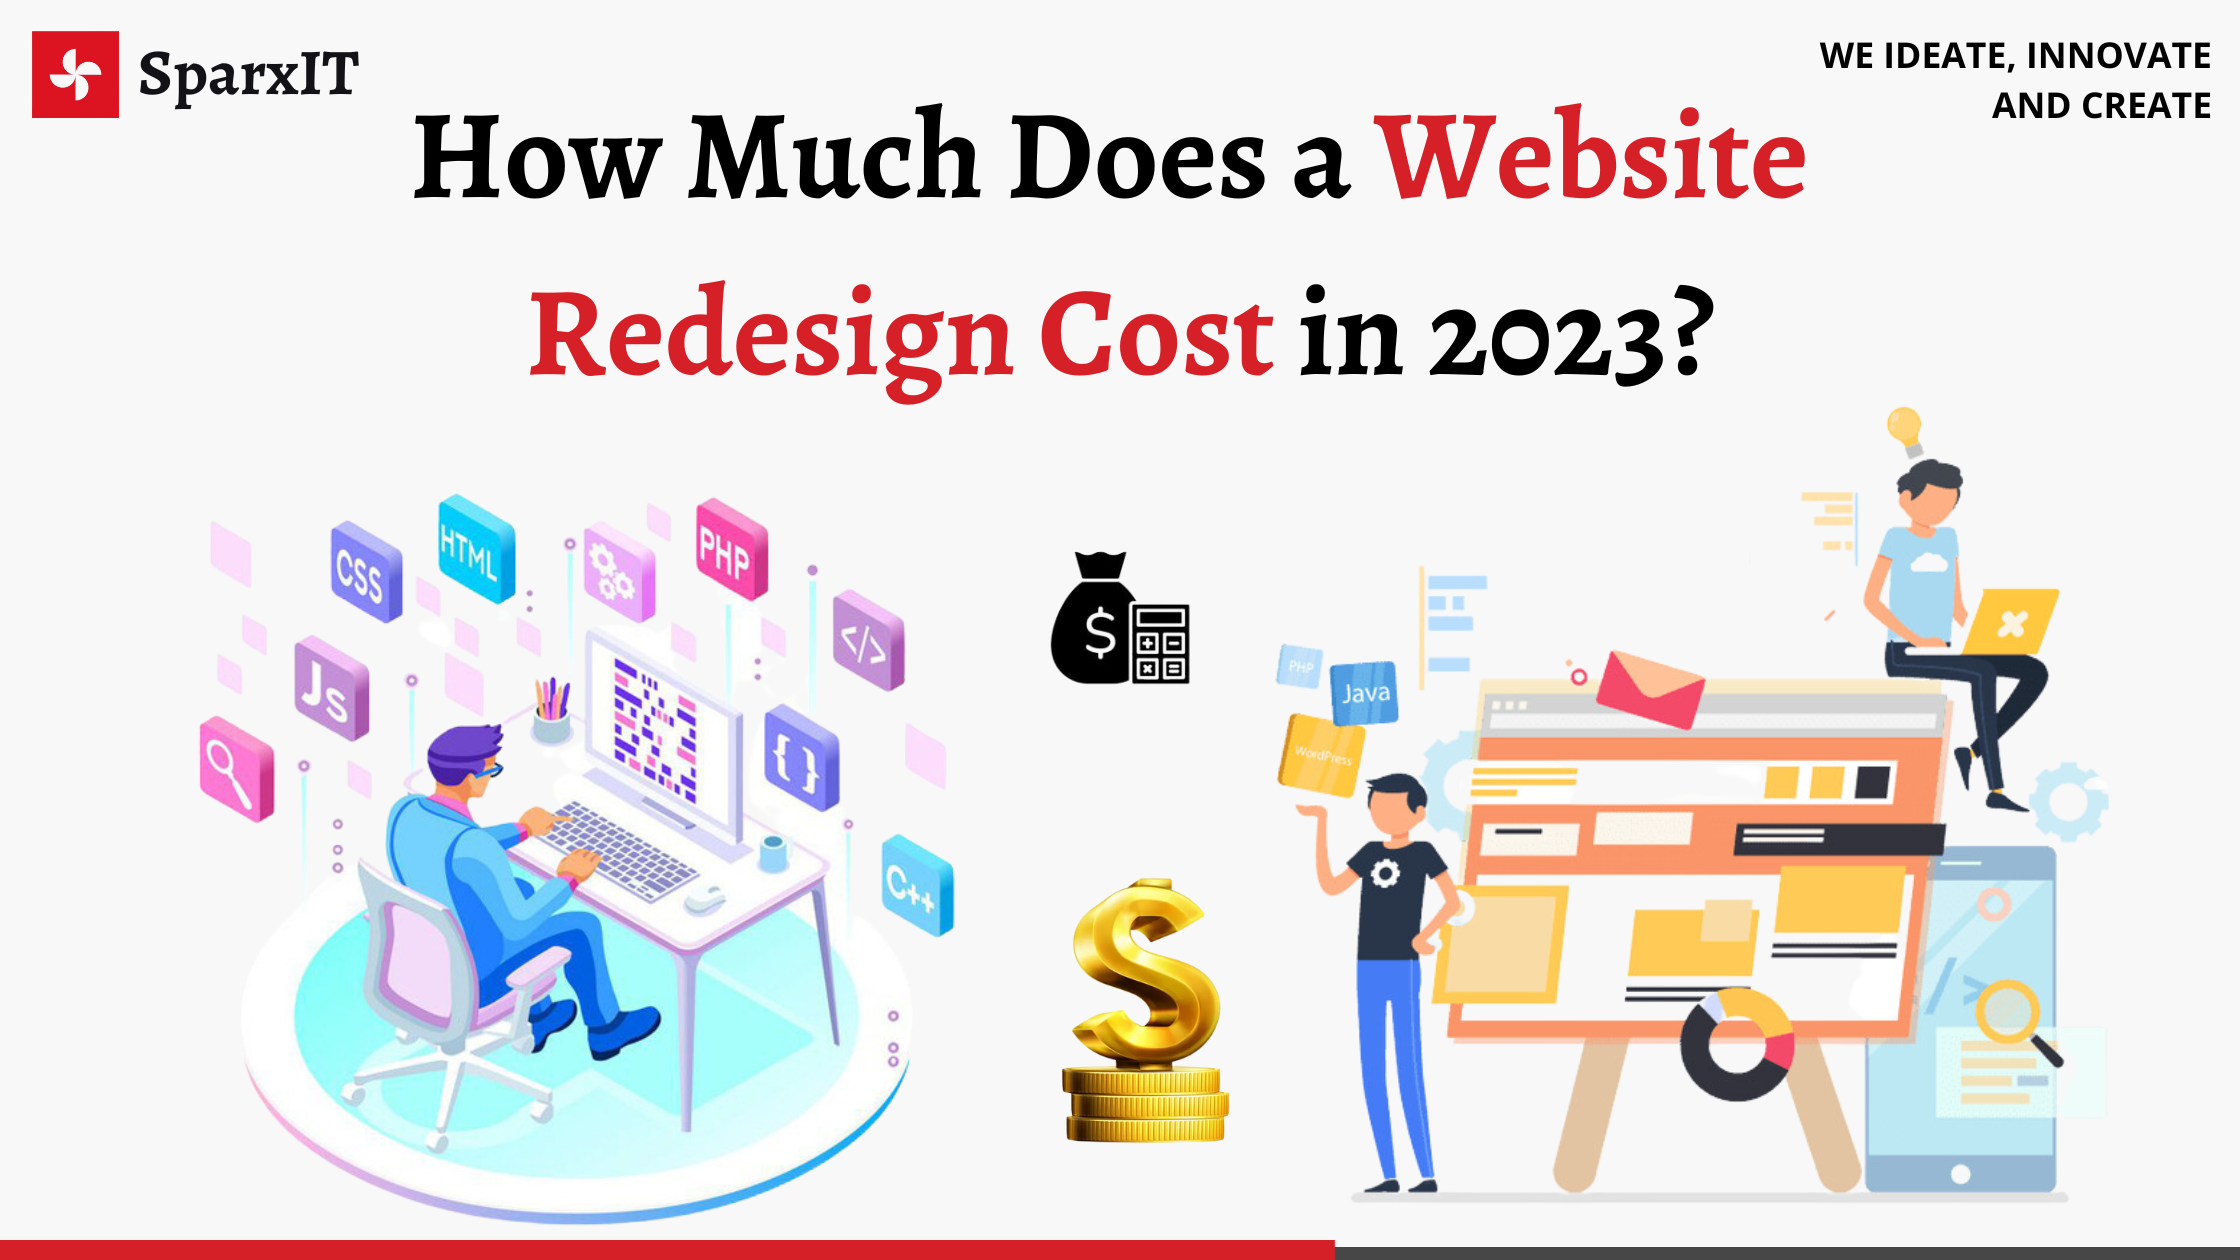 How Much Does it Cost to Redesign a Website?